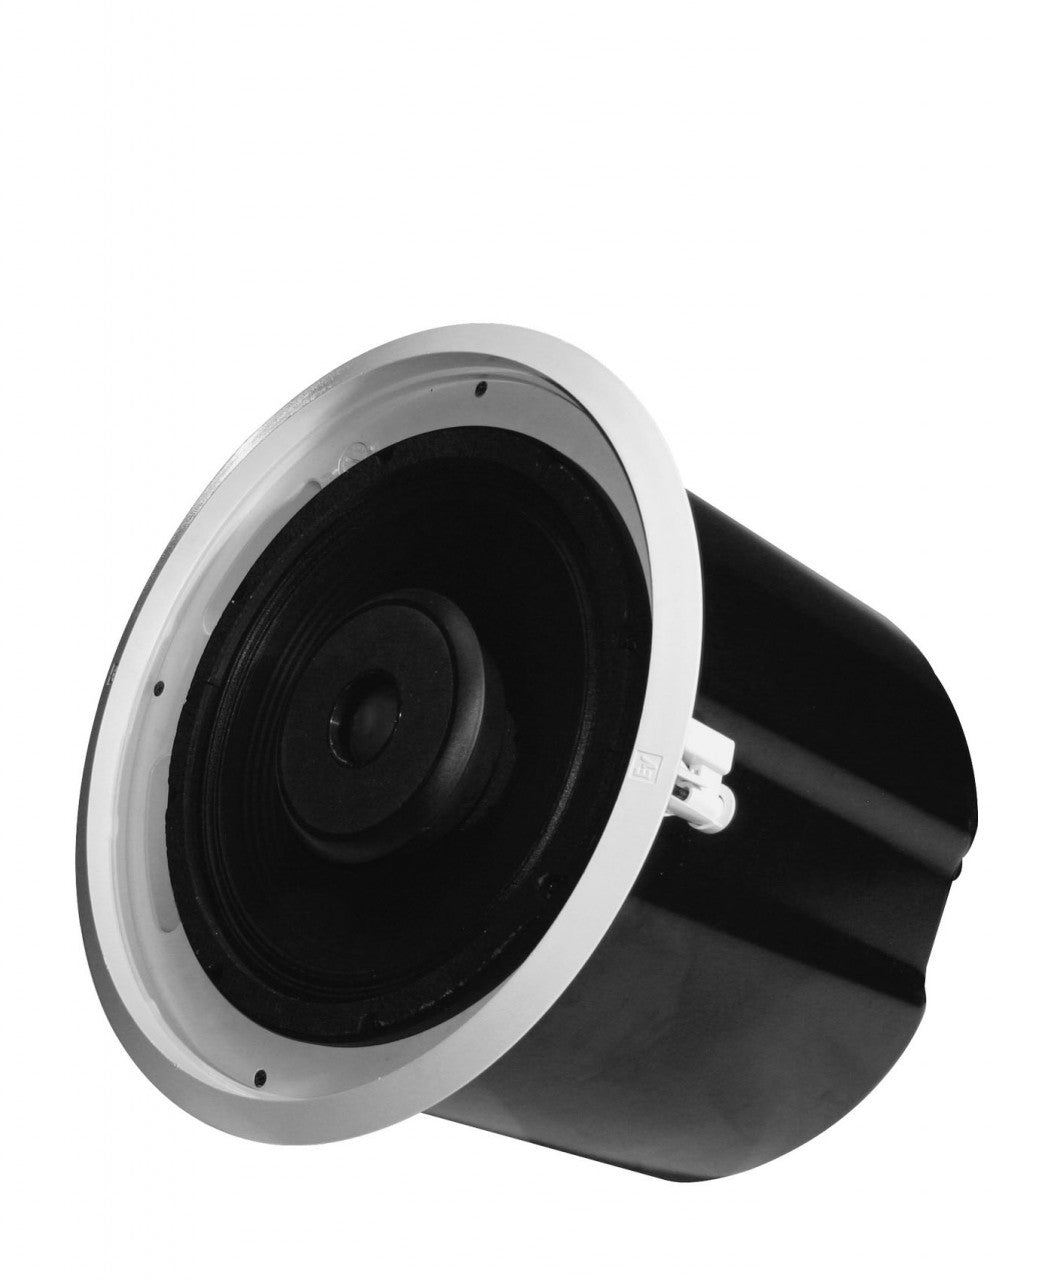 Electro-Voice EVID C12.2 12-Inch Two-Way Coaxial Ceiling Loudspeaker - Pair